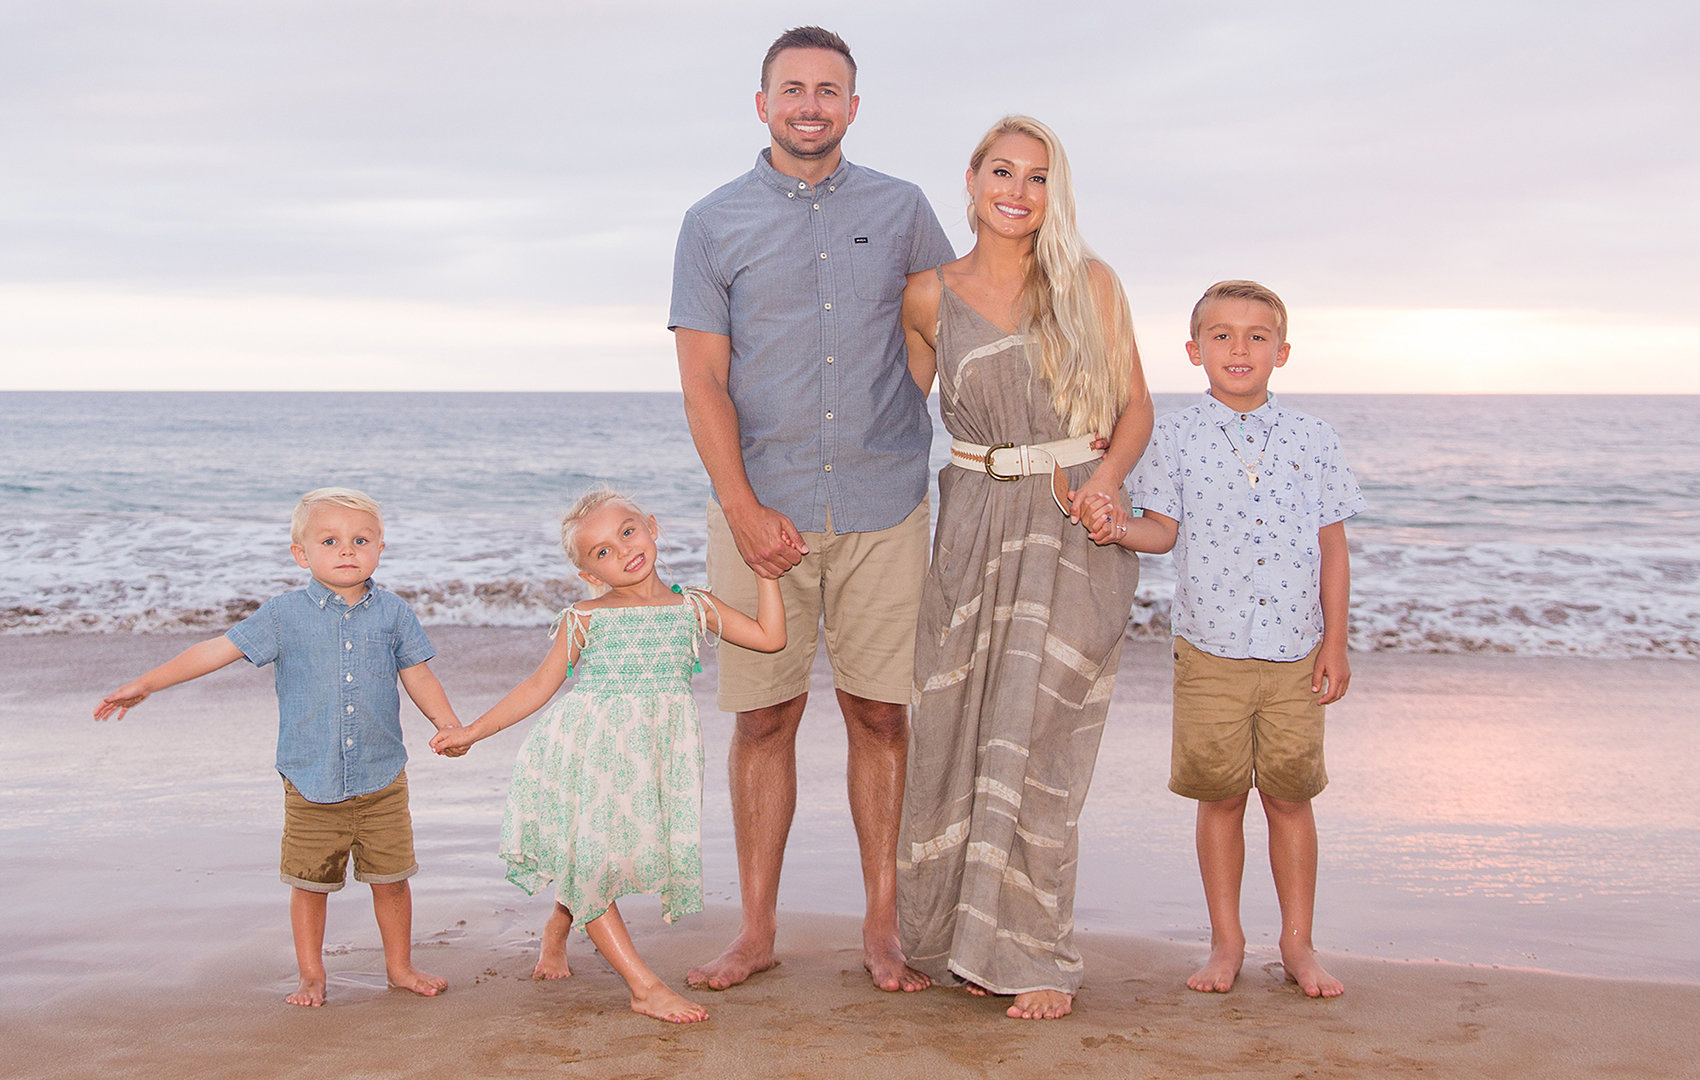 Family session from Los Angeles arrived Maui with big smiles.